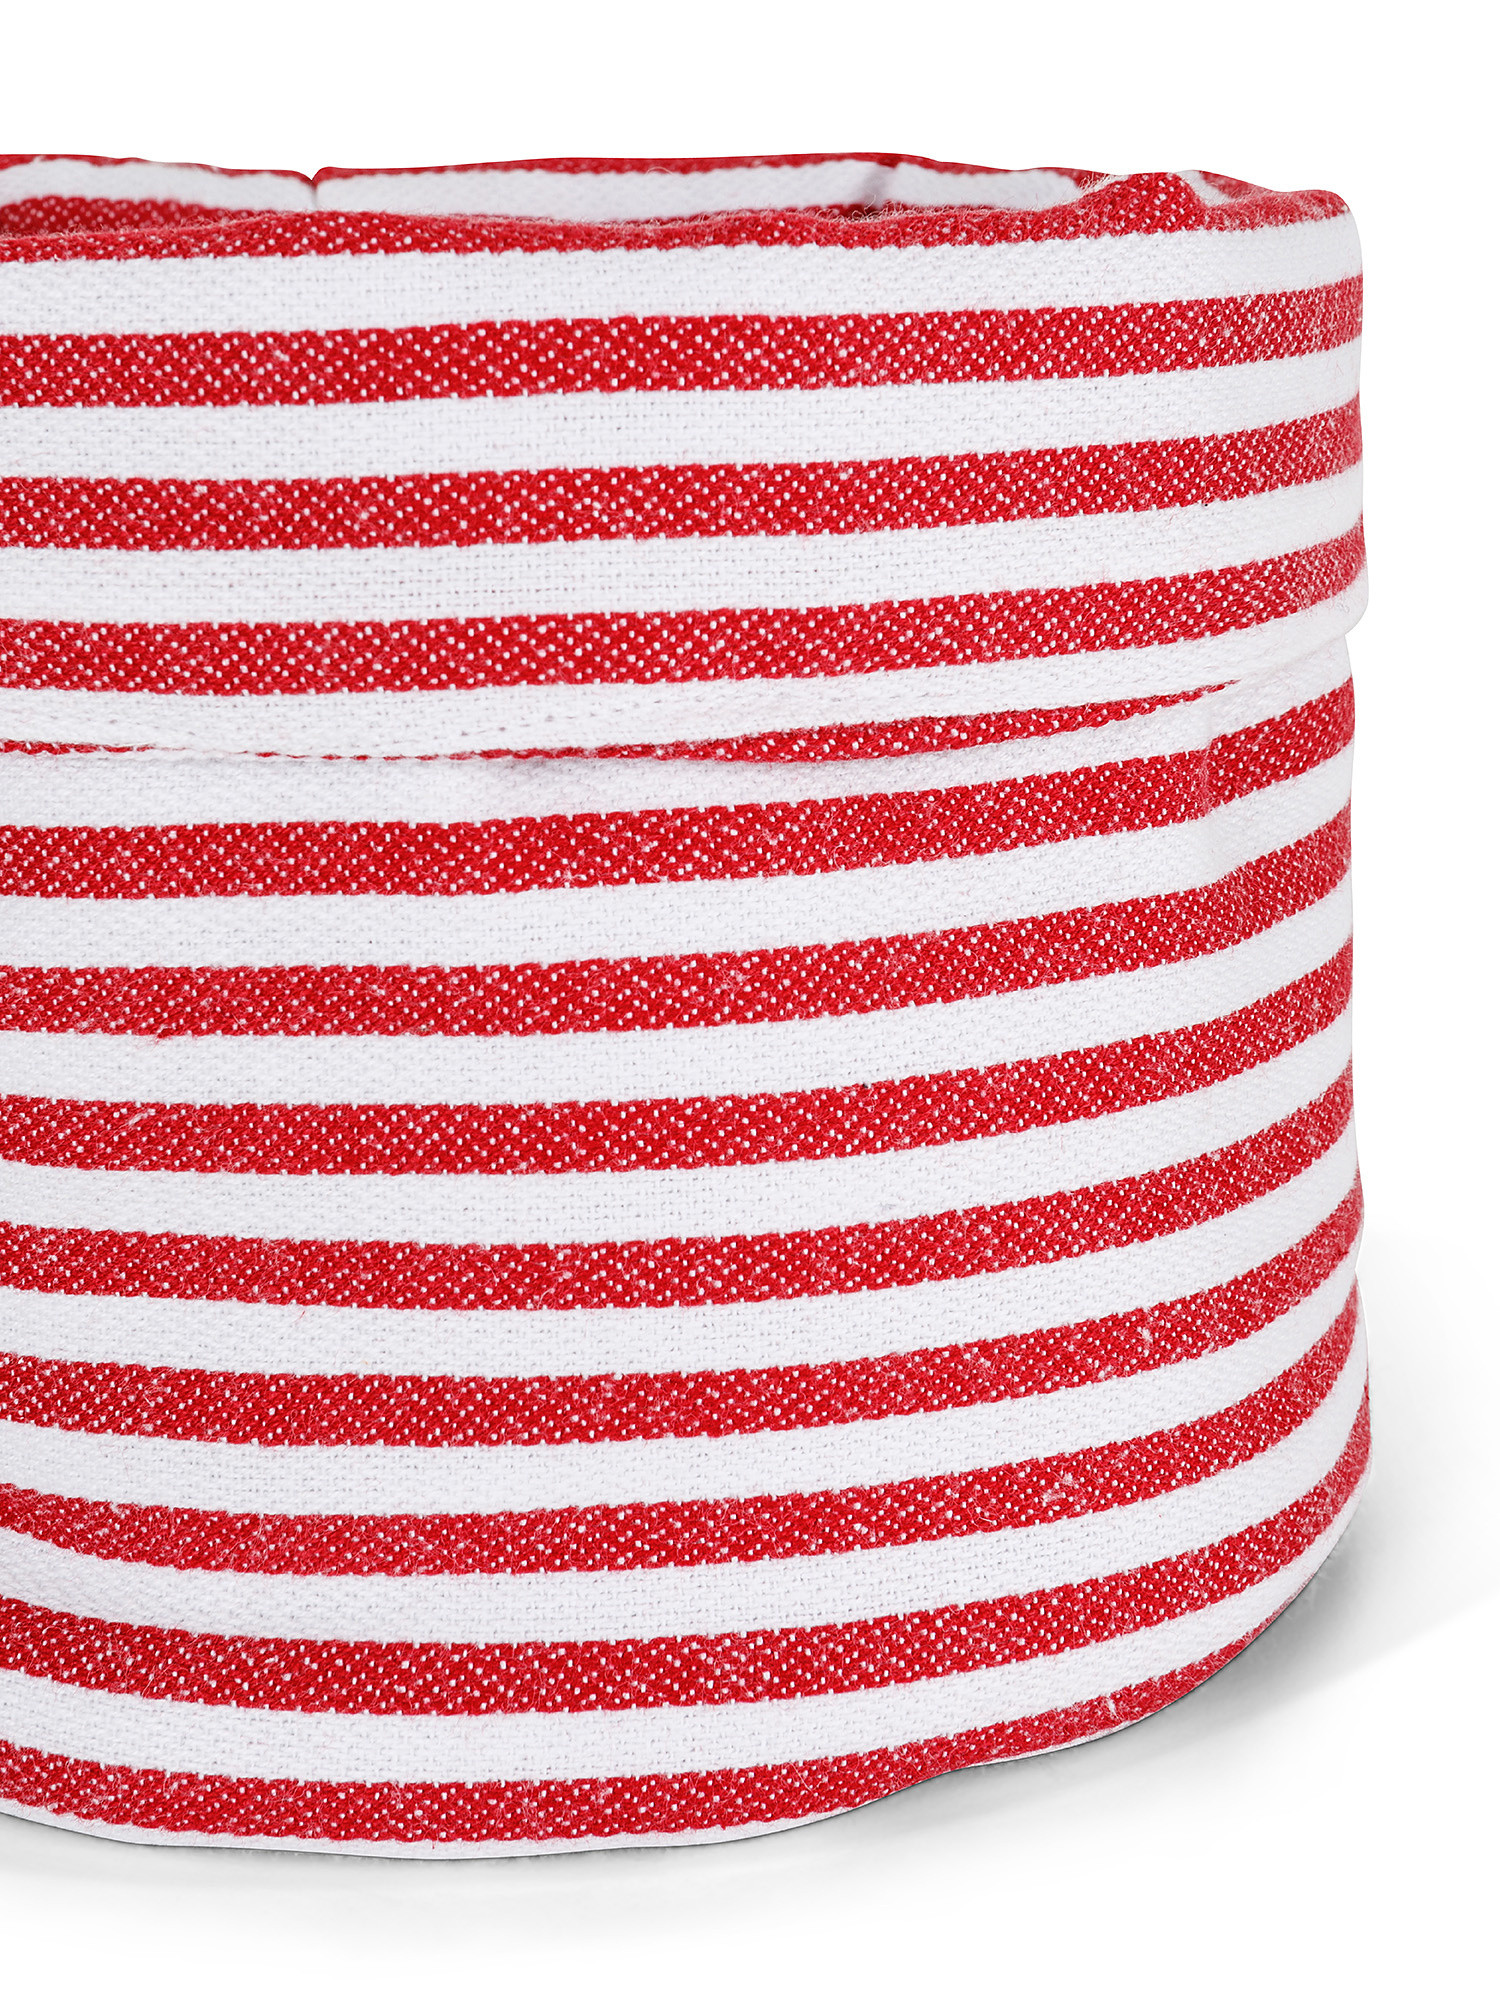 Pure cotton striped basket, Red, large image number 1